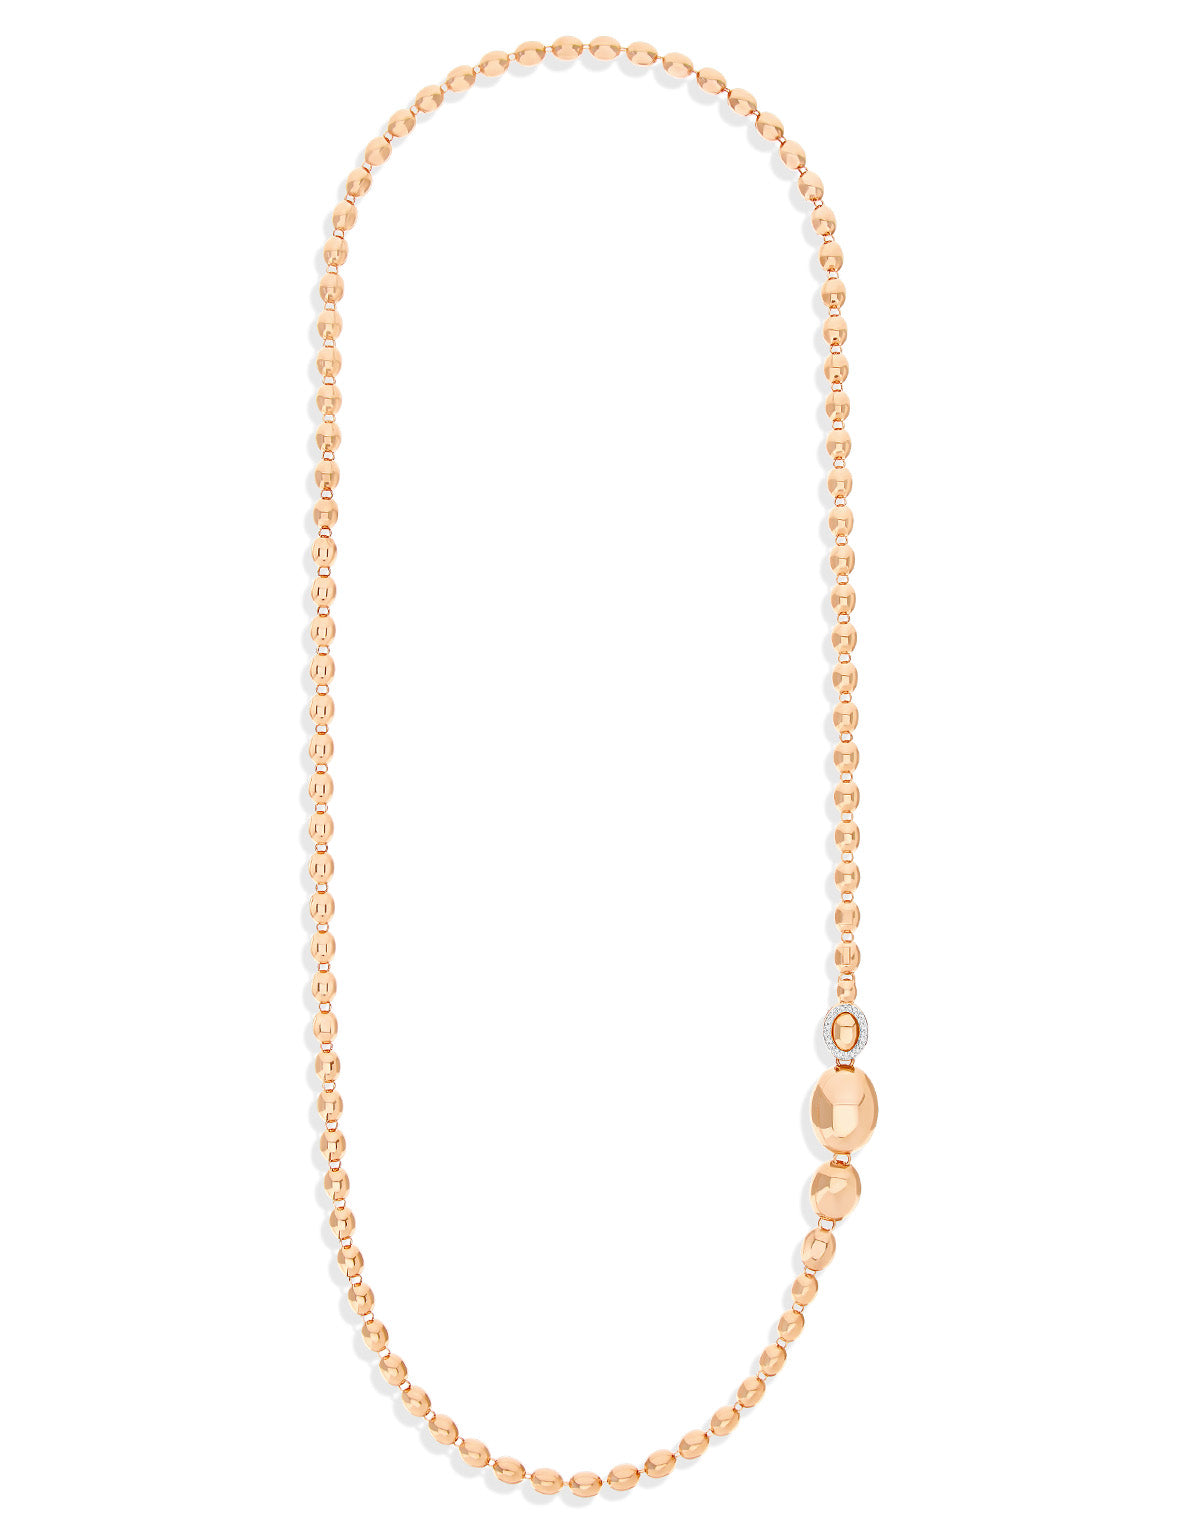 "Ivy" rose gold boules and diamonds iconic convertible necklace (short)